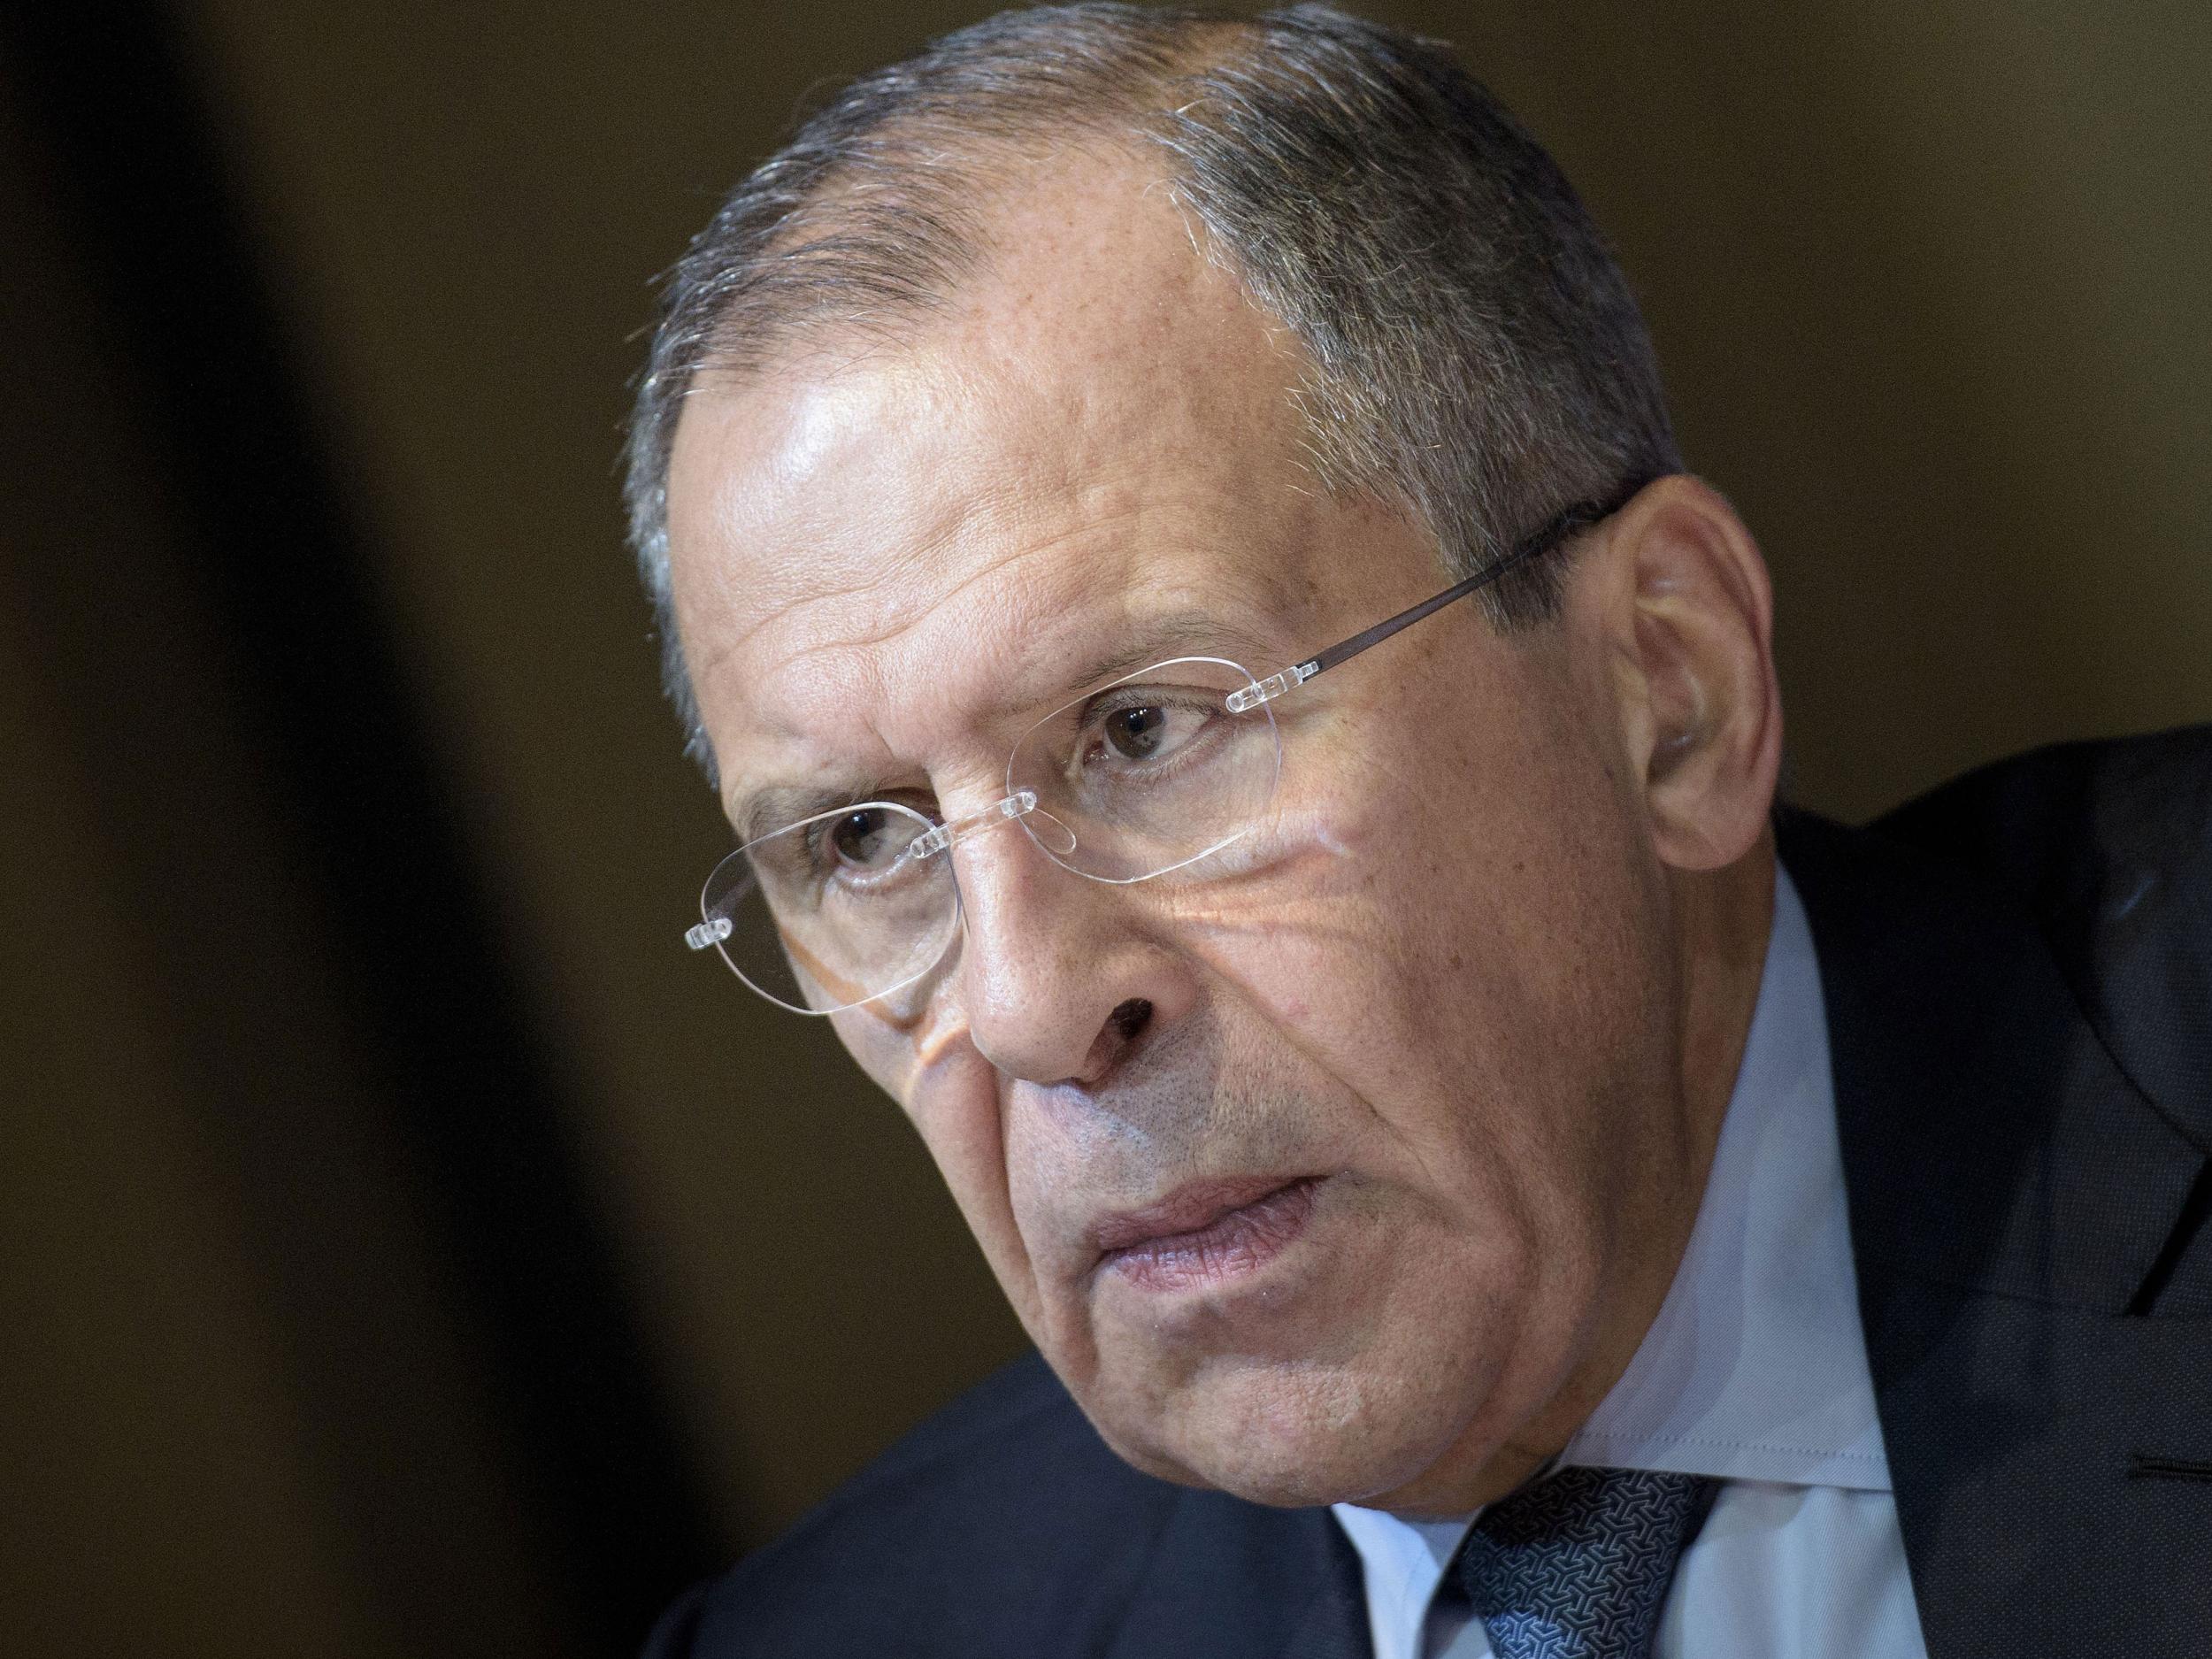 Foreign Minister Sergei Lavrov has spoken about the case during his press conference